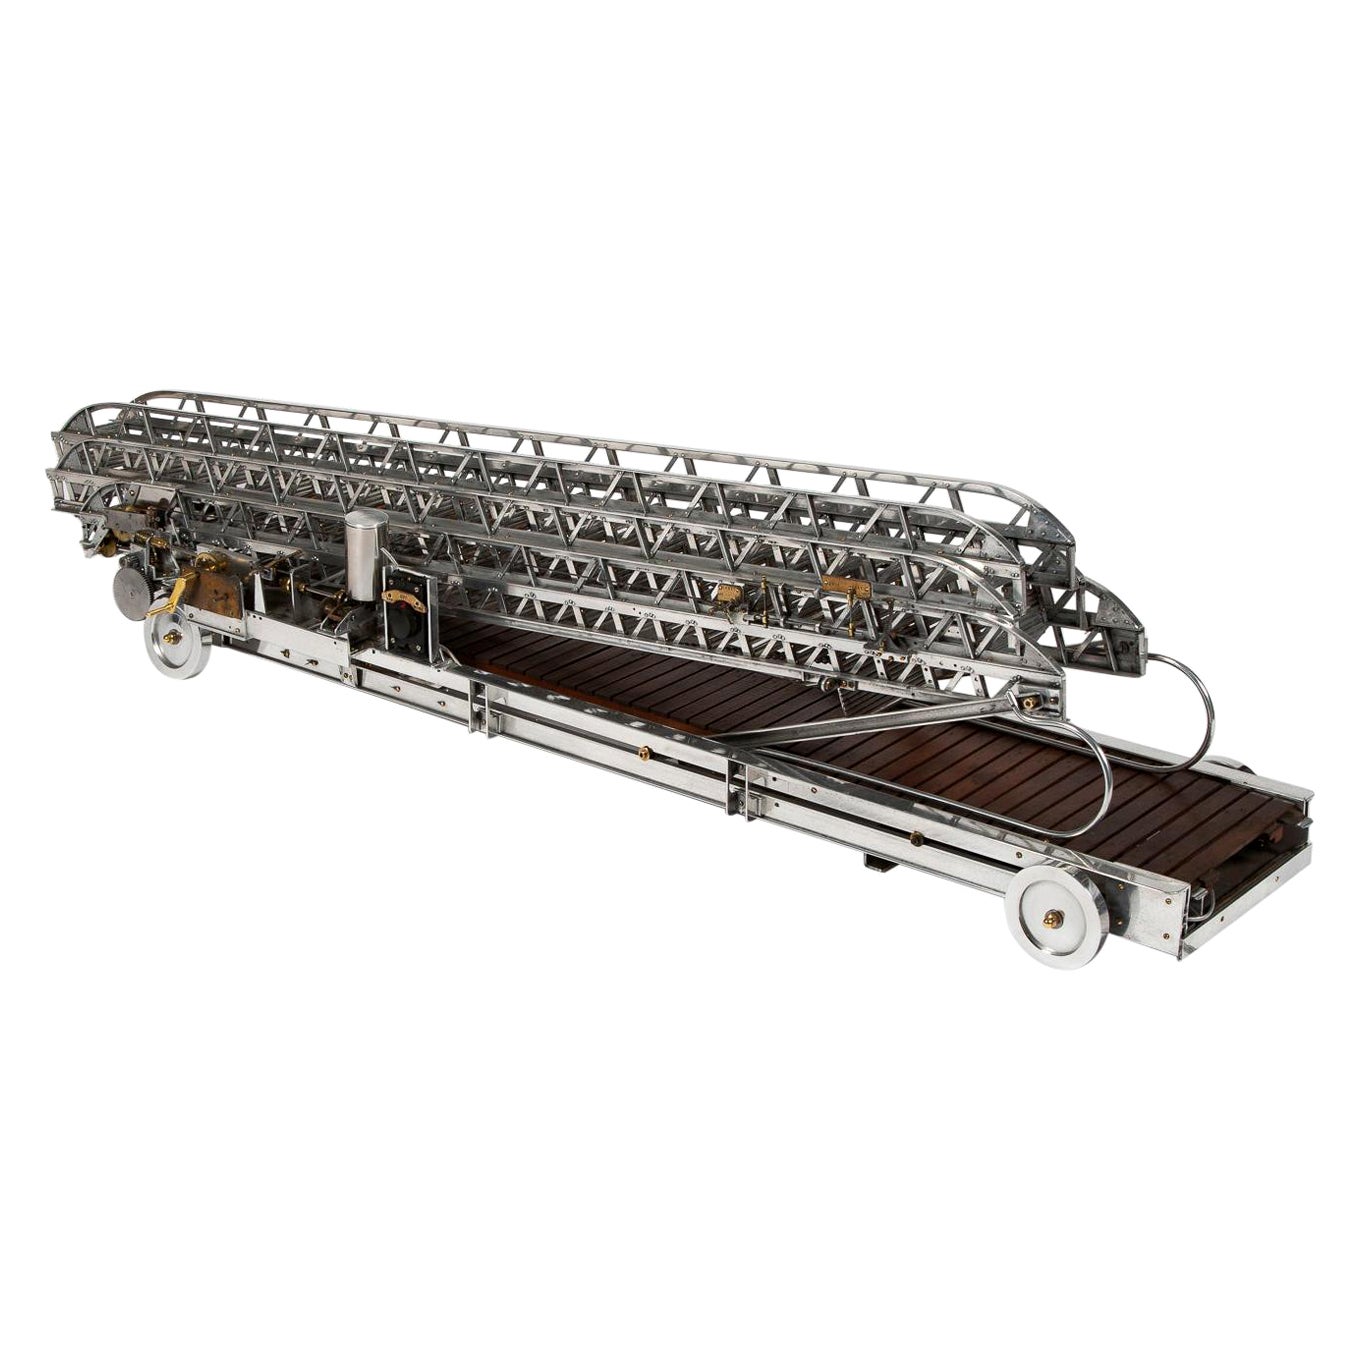 Engineer's Scale Model of Extending Fire Escape Ladder